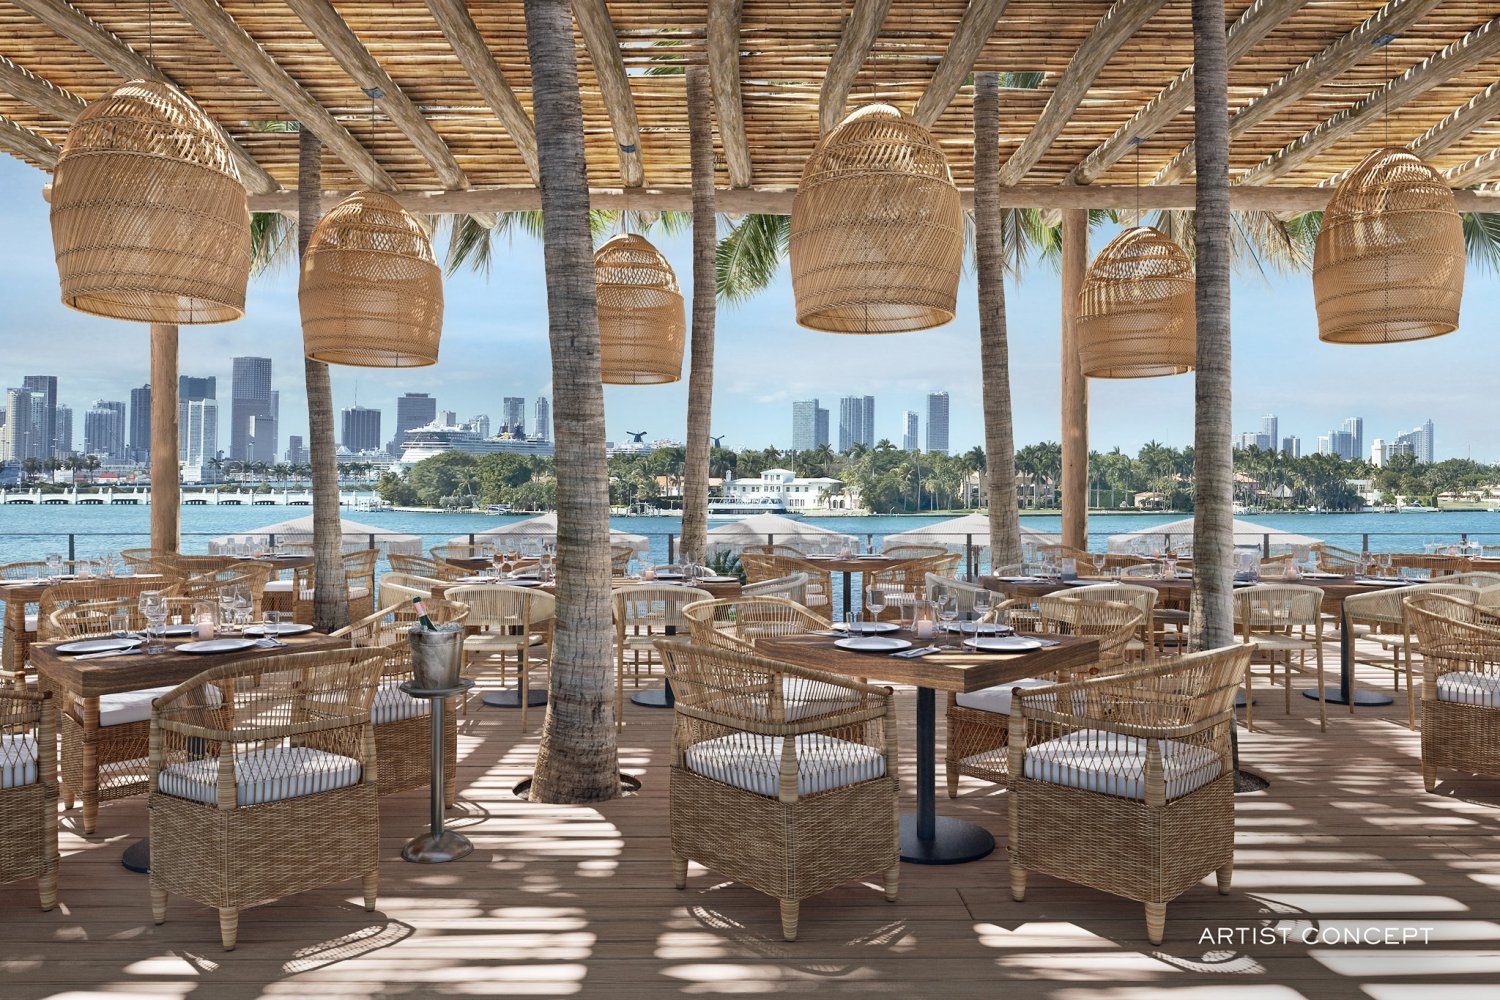 How to spend a Weekend in Miami